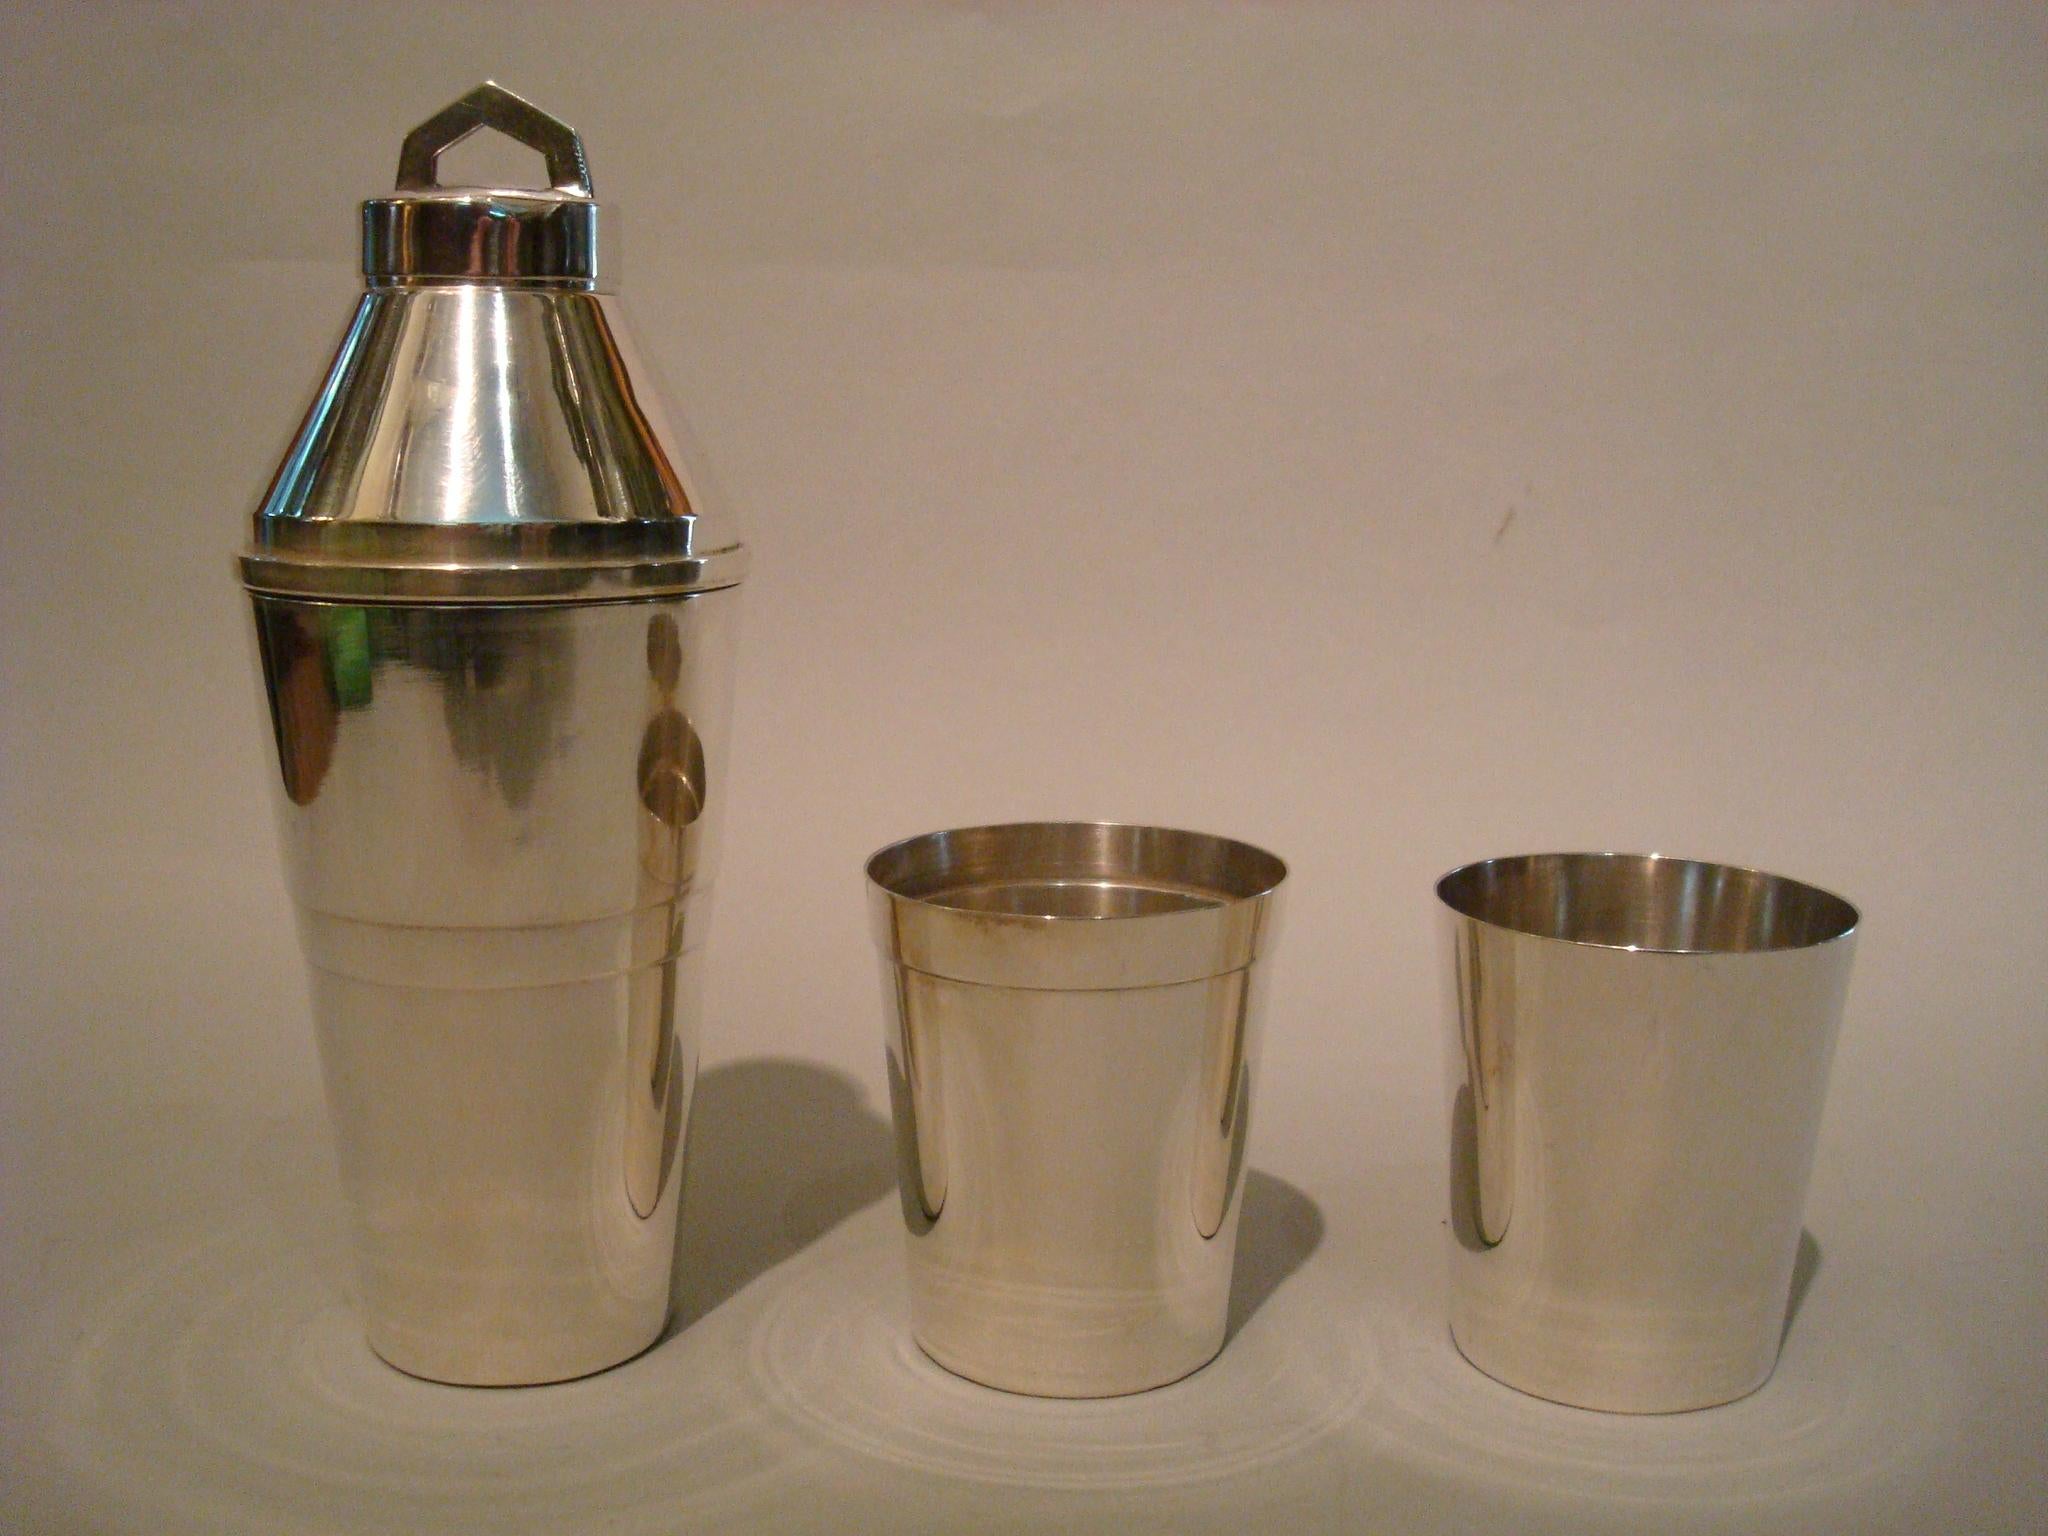 Silvered Art Deco Hermes Paris Travel Cocktail Shaker with two goblets, 1930, France